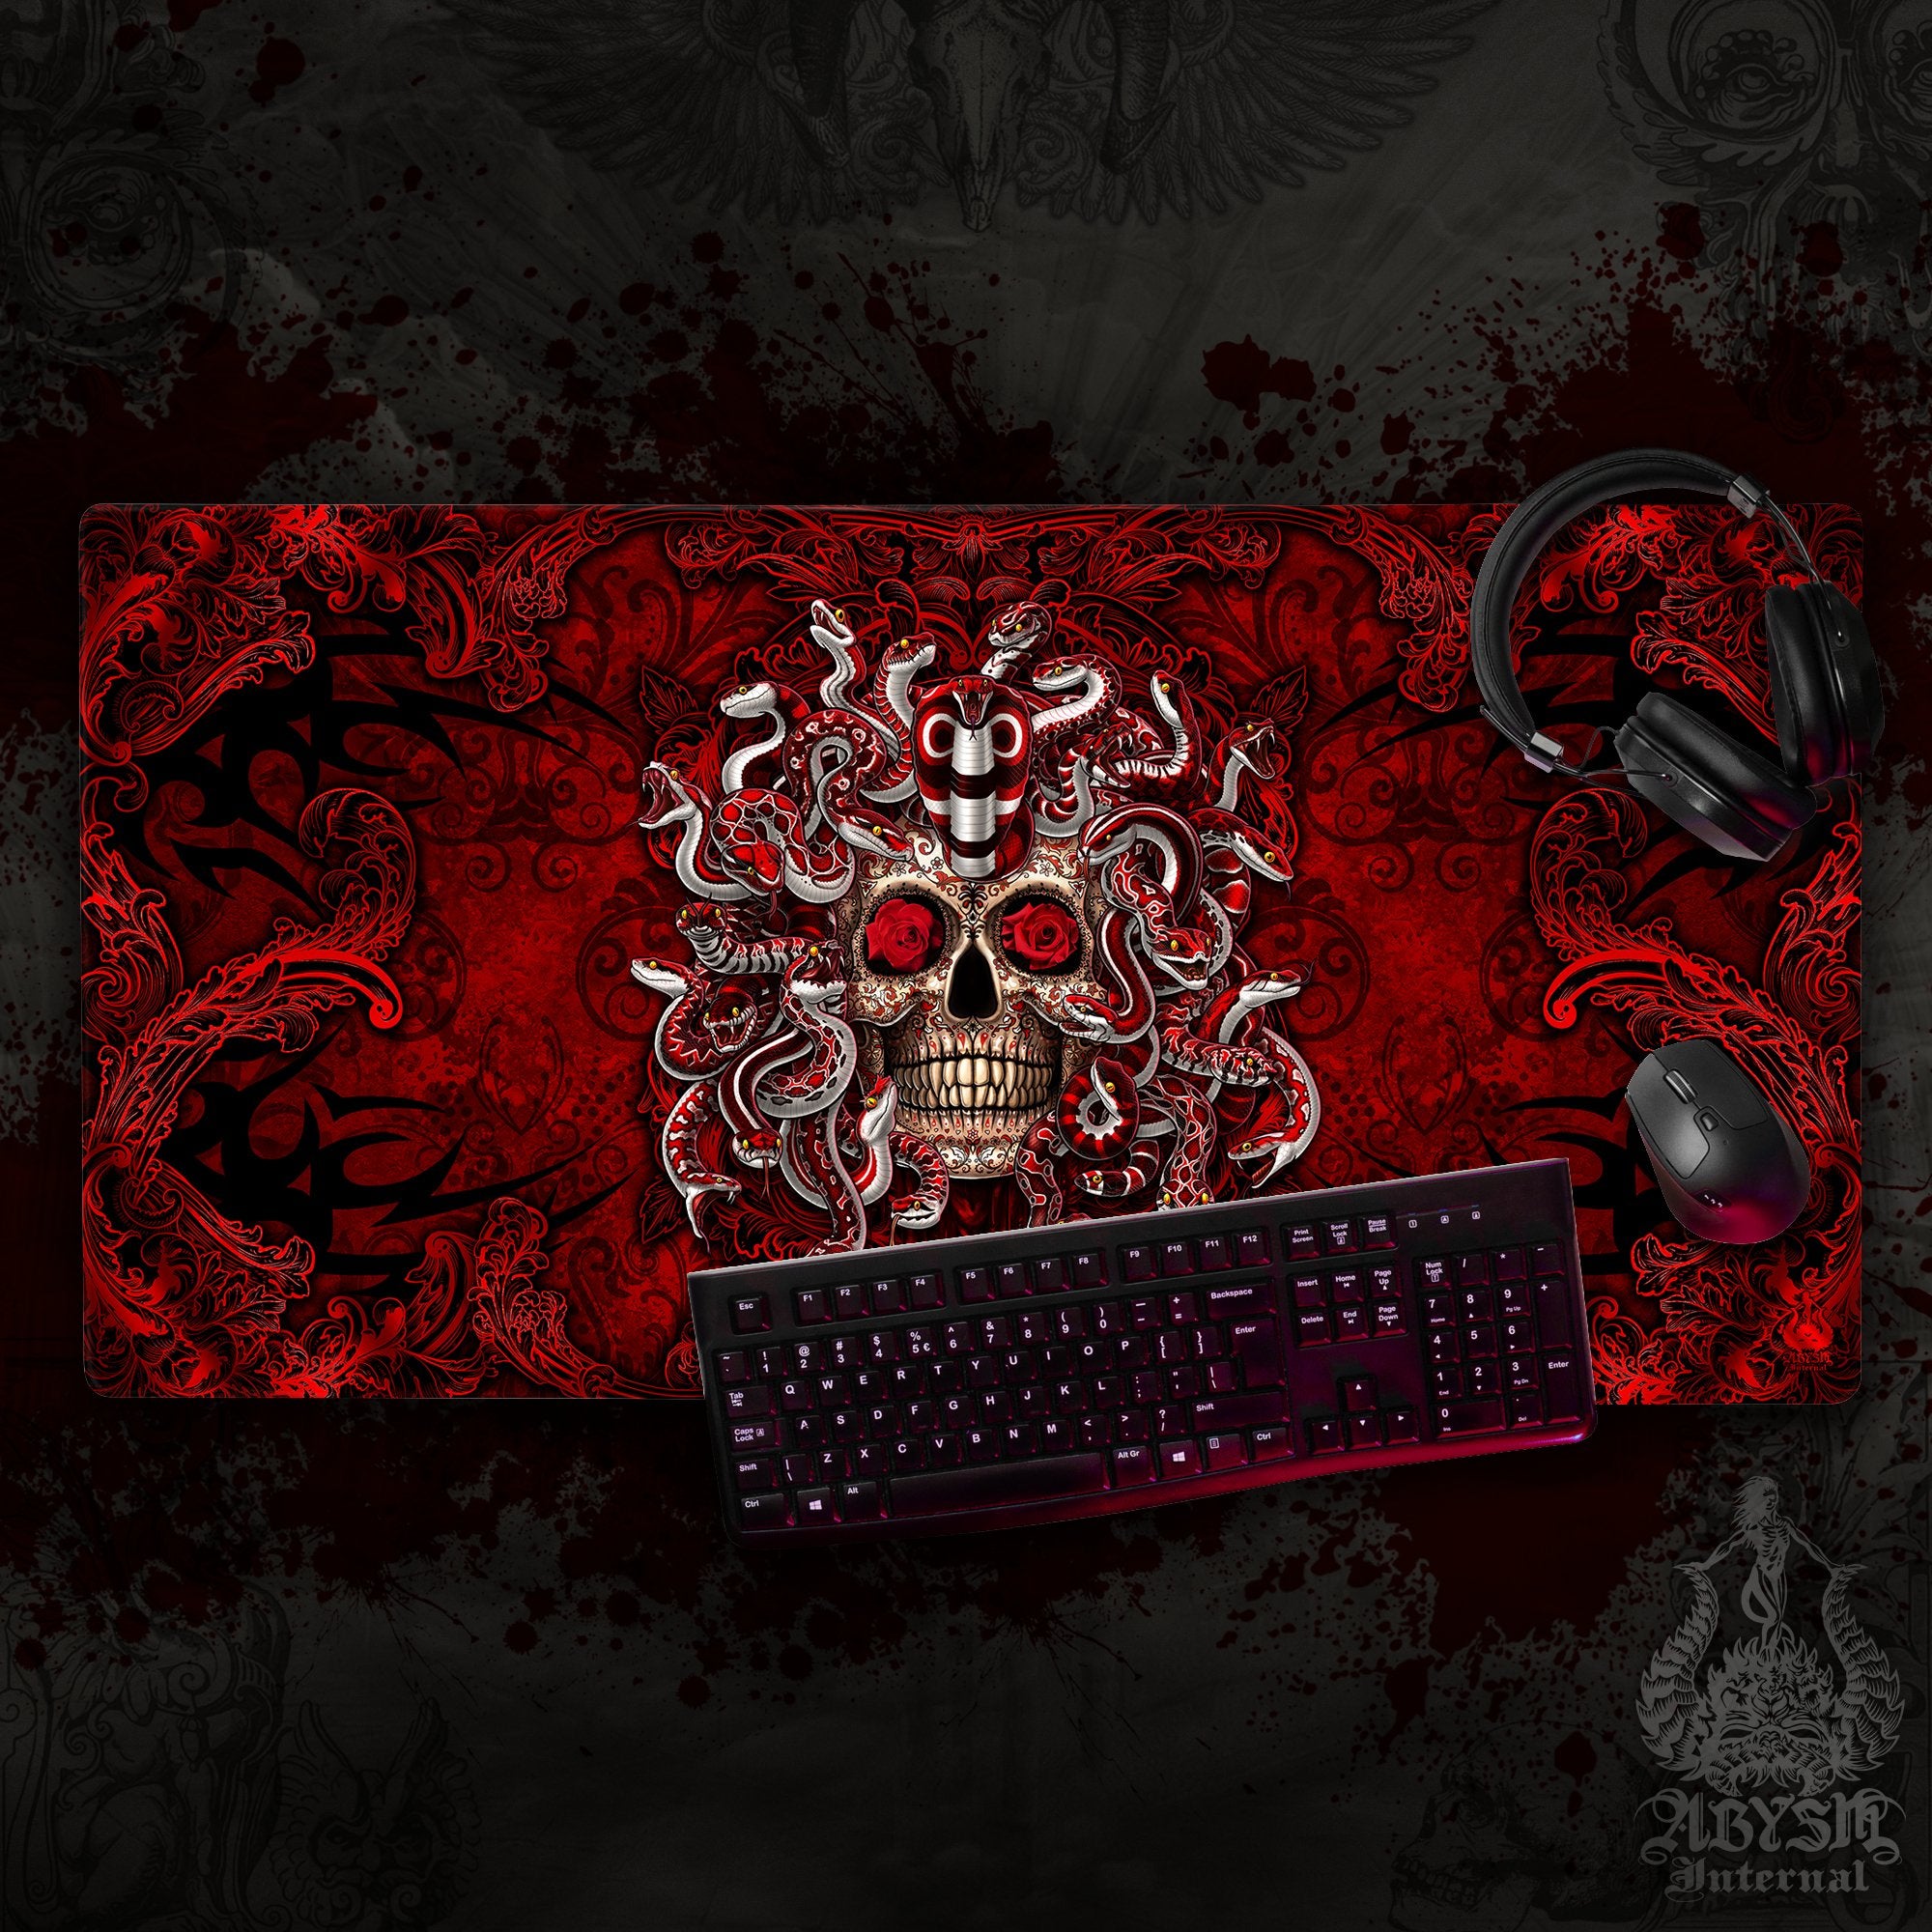 Sugar Skull Mouse Pad, Dia de los Muertos Gaming Desk Mat, Day of the Dead Workpad, Gothic Medusa Table Protector Cover, Art Print - Abysm Internal